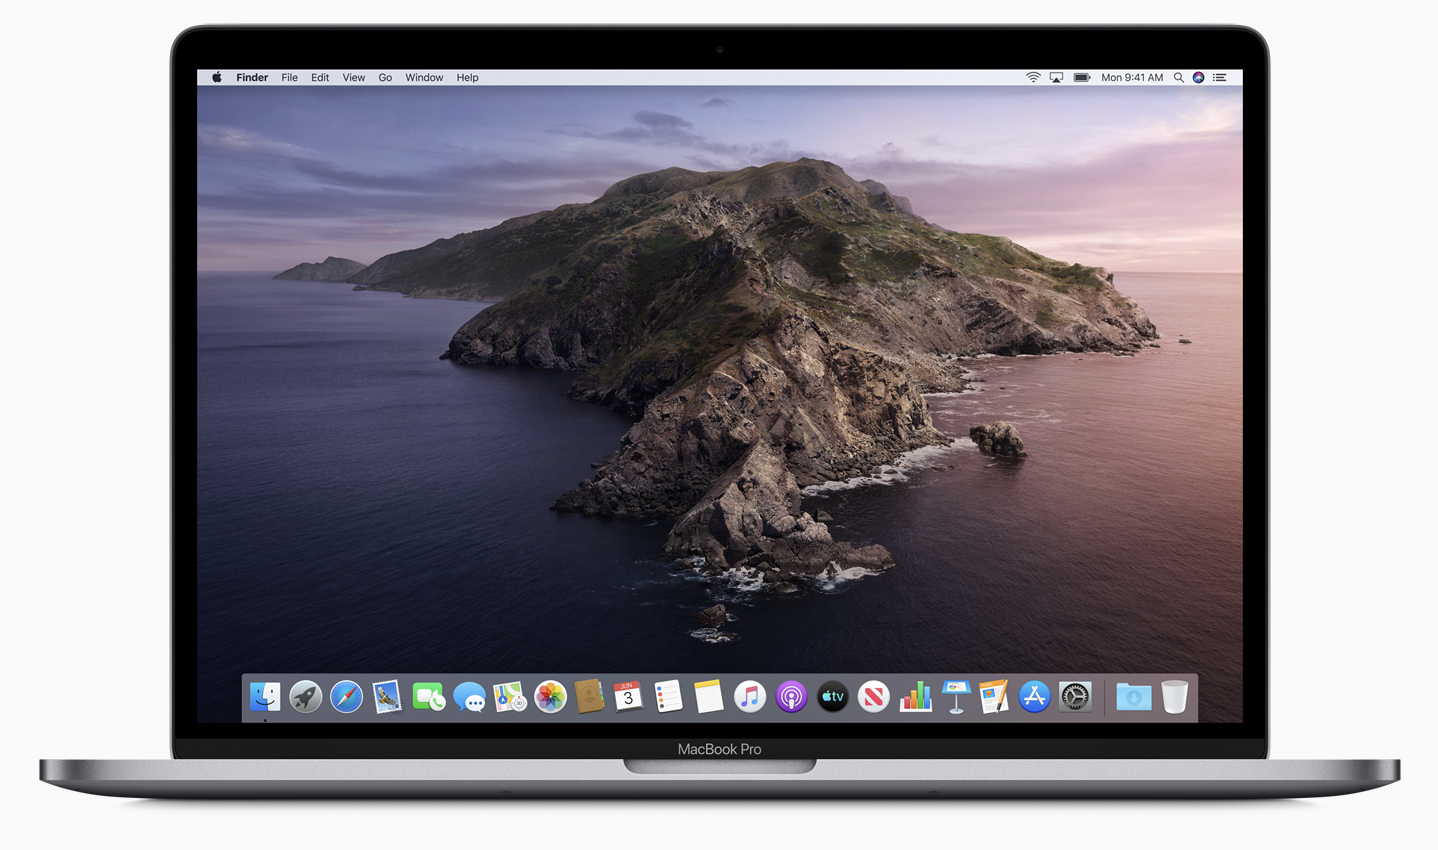 macOS Catalina is now available